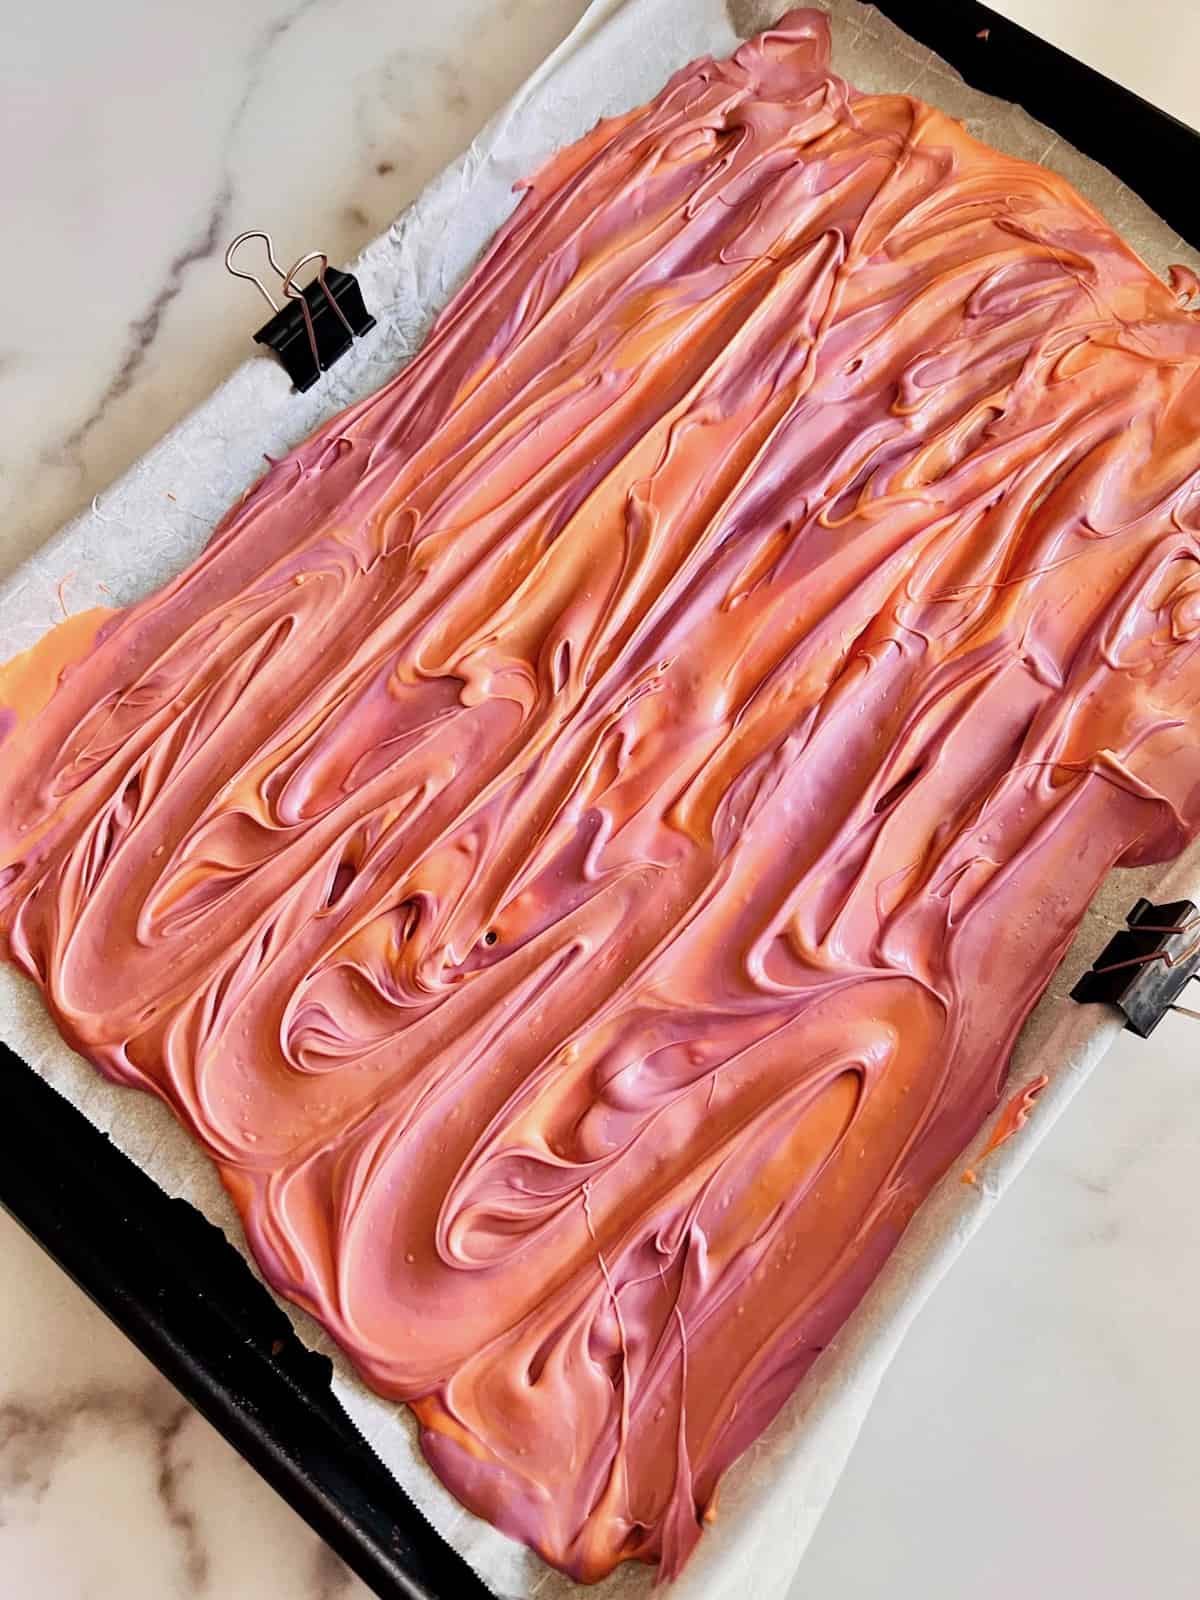 Parchment paper topped with melted candy.